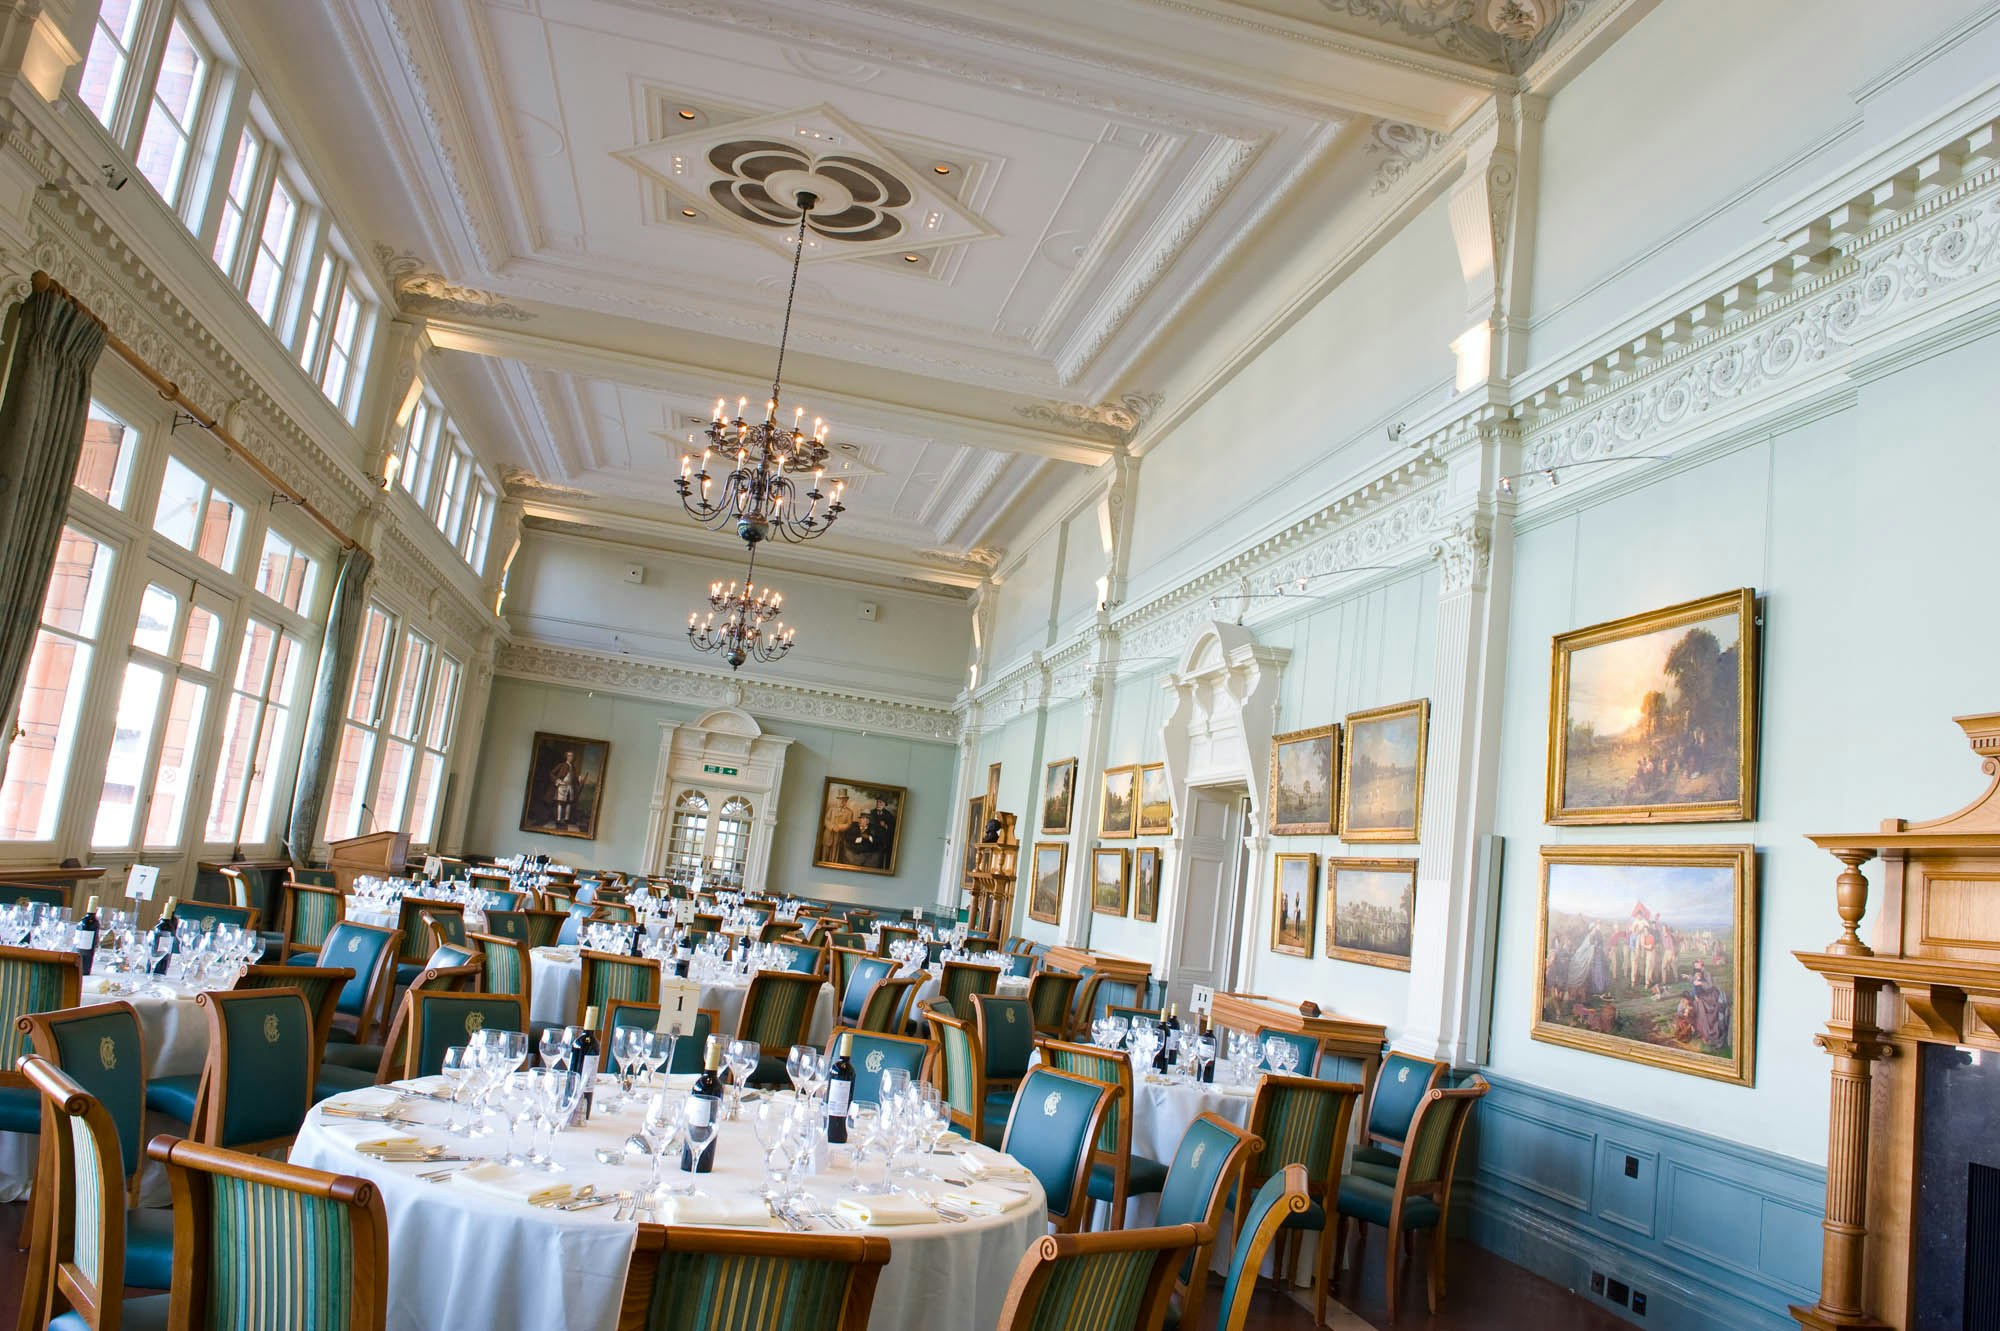 Unusual Filming Locations in London - Lord's Cricket Ground - Events in Long Room - Banner